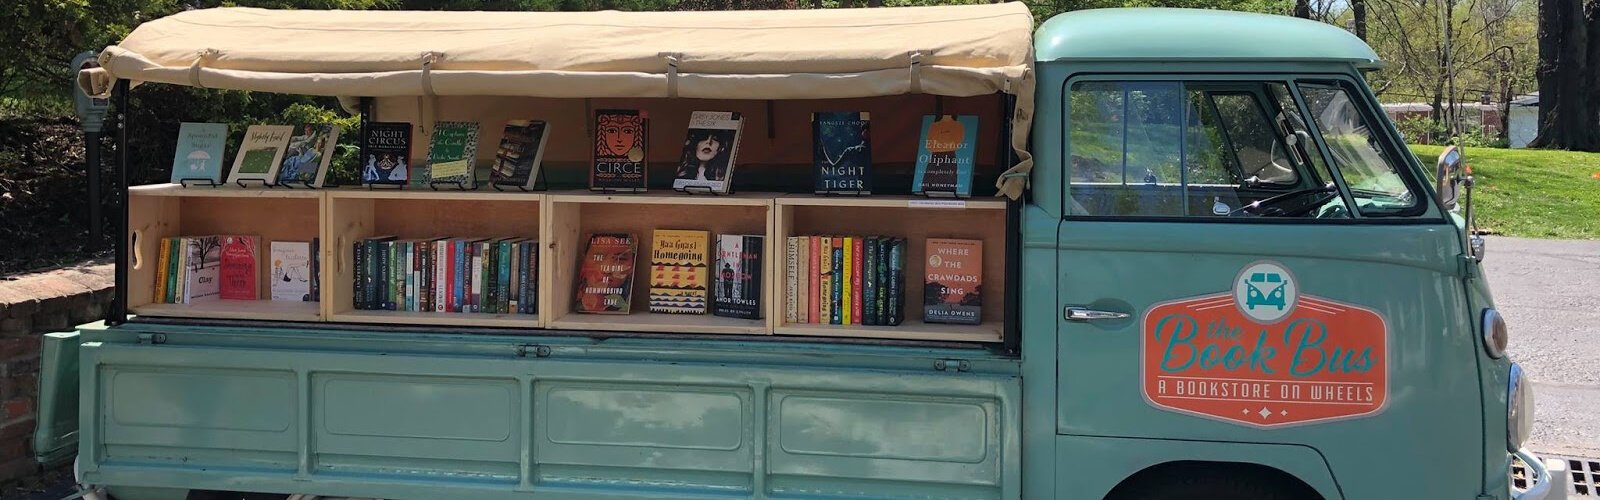 In 2018, Melanie Moore took her family pickup-turned book mobile on the road.